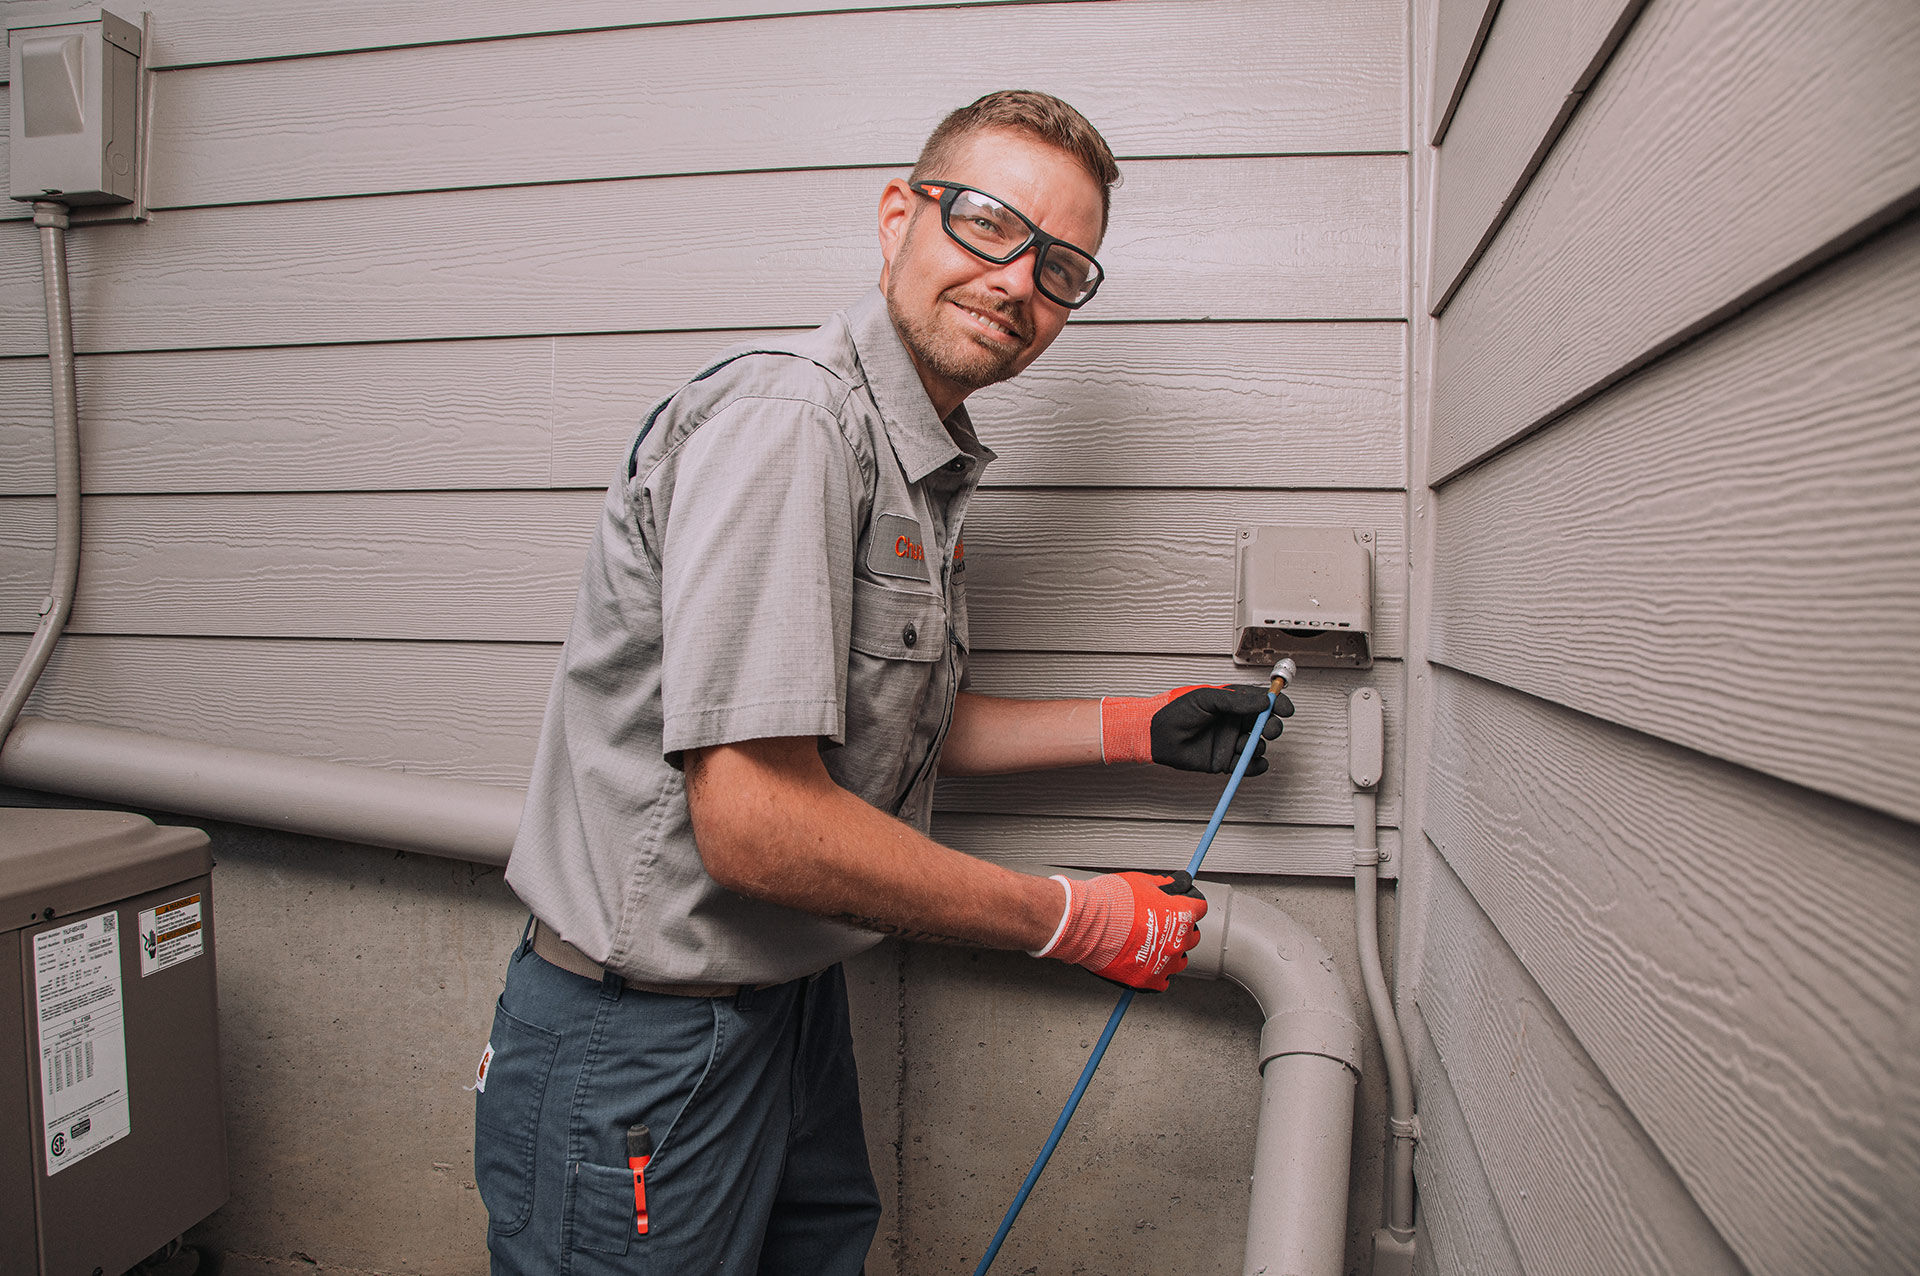 Smiling Dryer Vent Cleaning service professional cleaning a dryer vent for client.